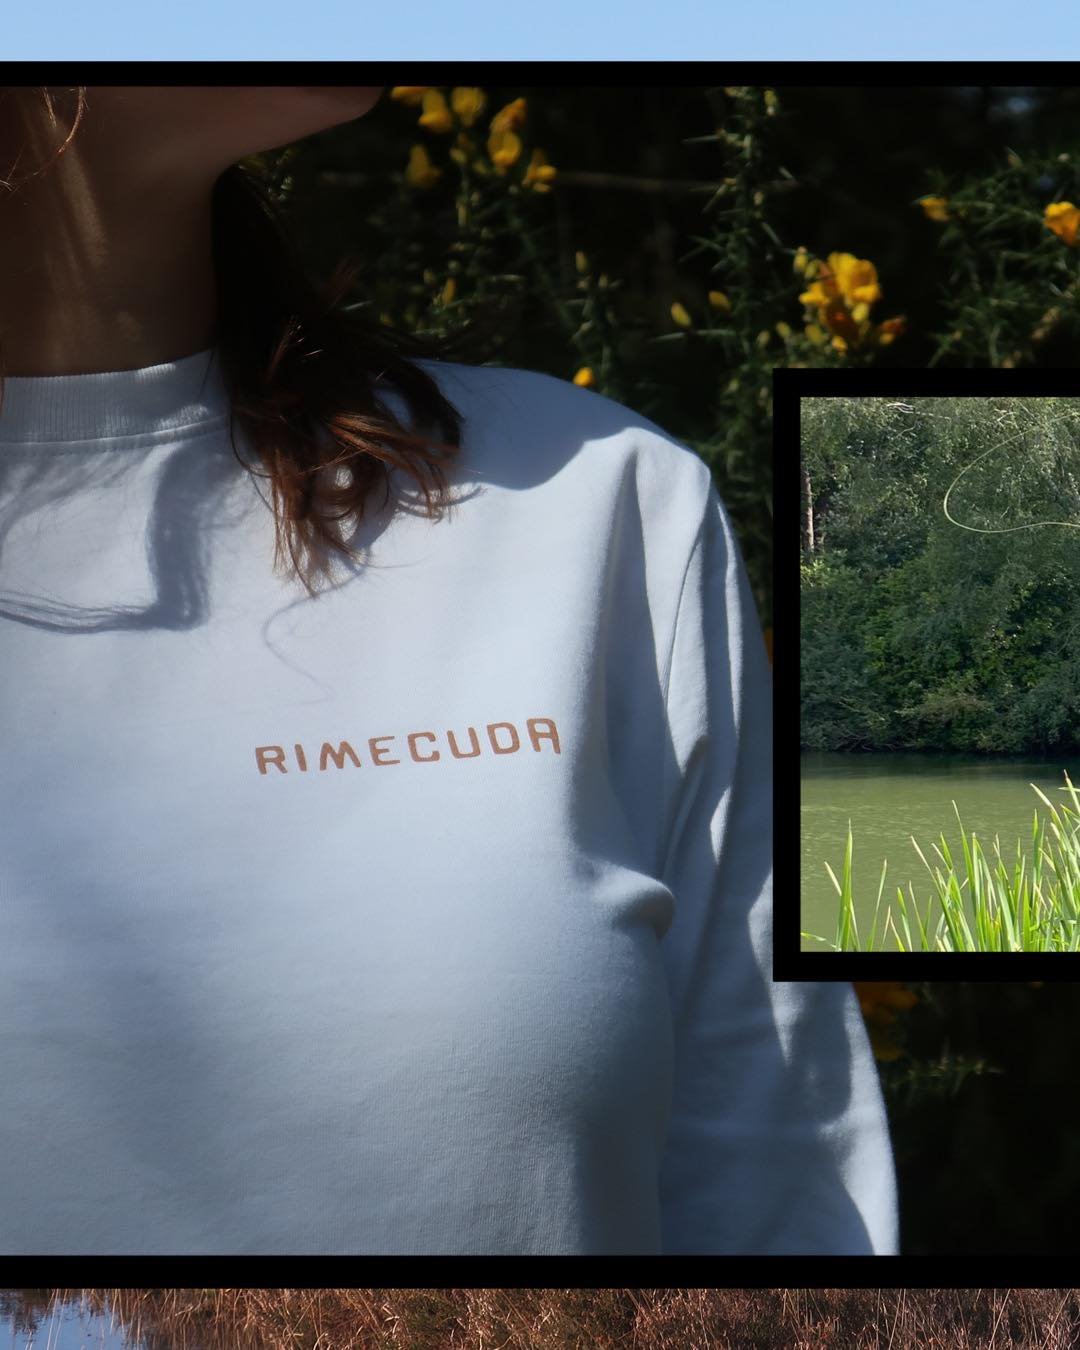 Clothing and accessories from The New Forest

#ride #walk #adventure #skate #southcoast #fish #newforestnationalpark #outdoors #rimecuda #explore #screenprinting #clothing #outside #unisex #bikepacking #gravel #biketouring #gravelbike #tree #forest #